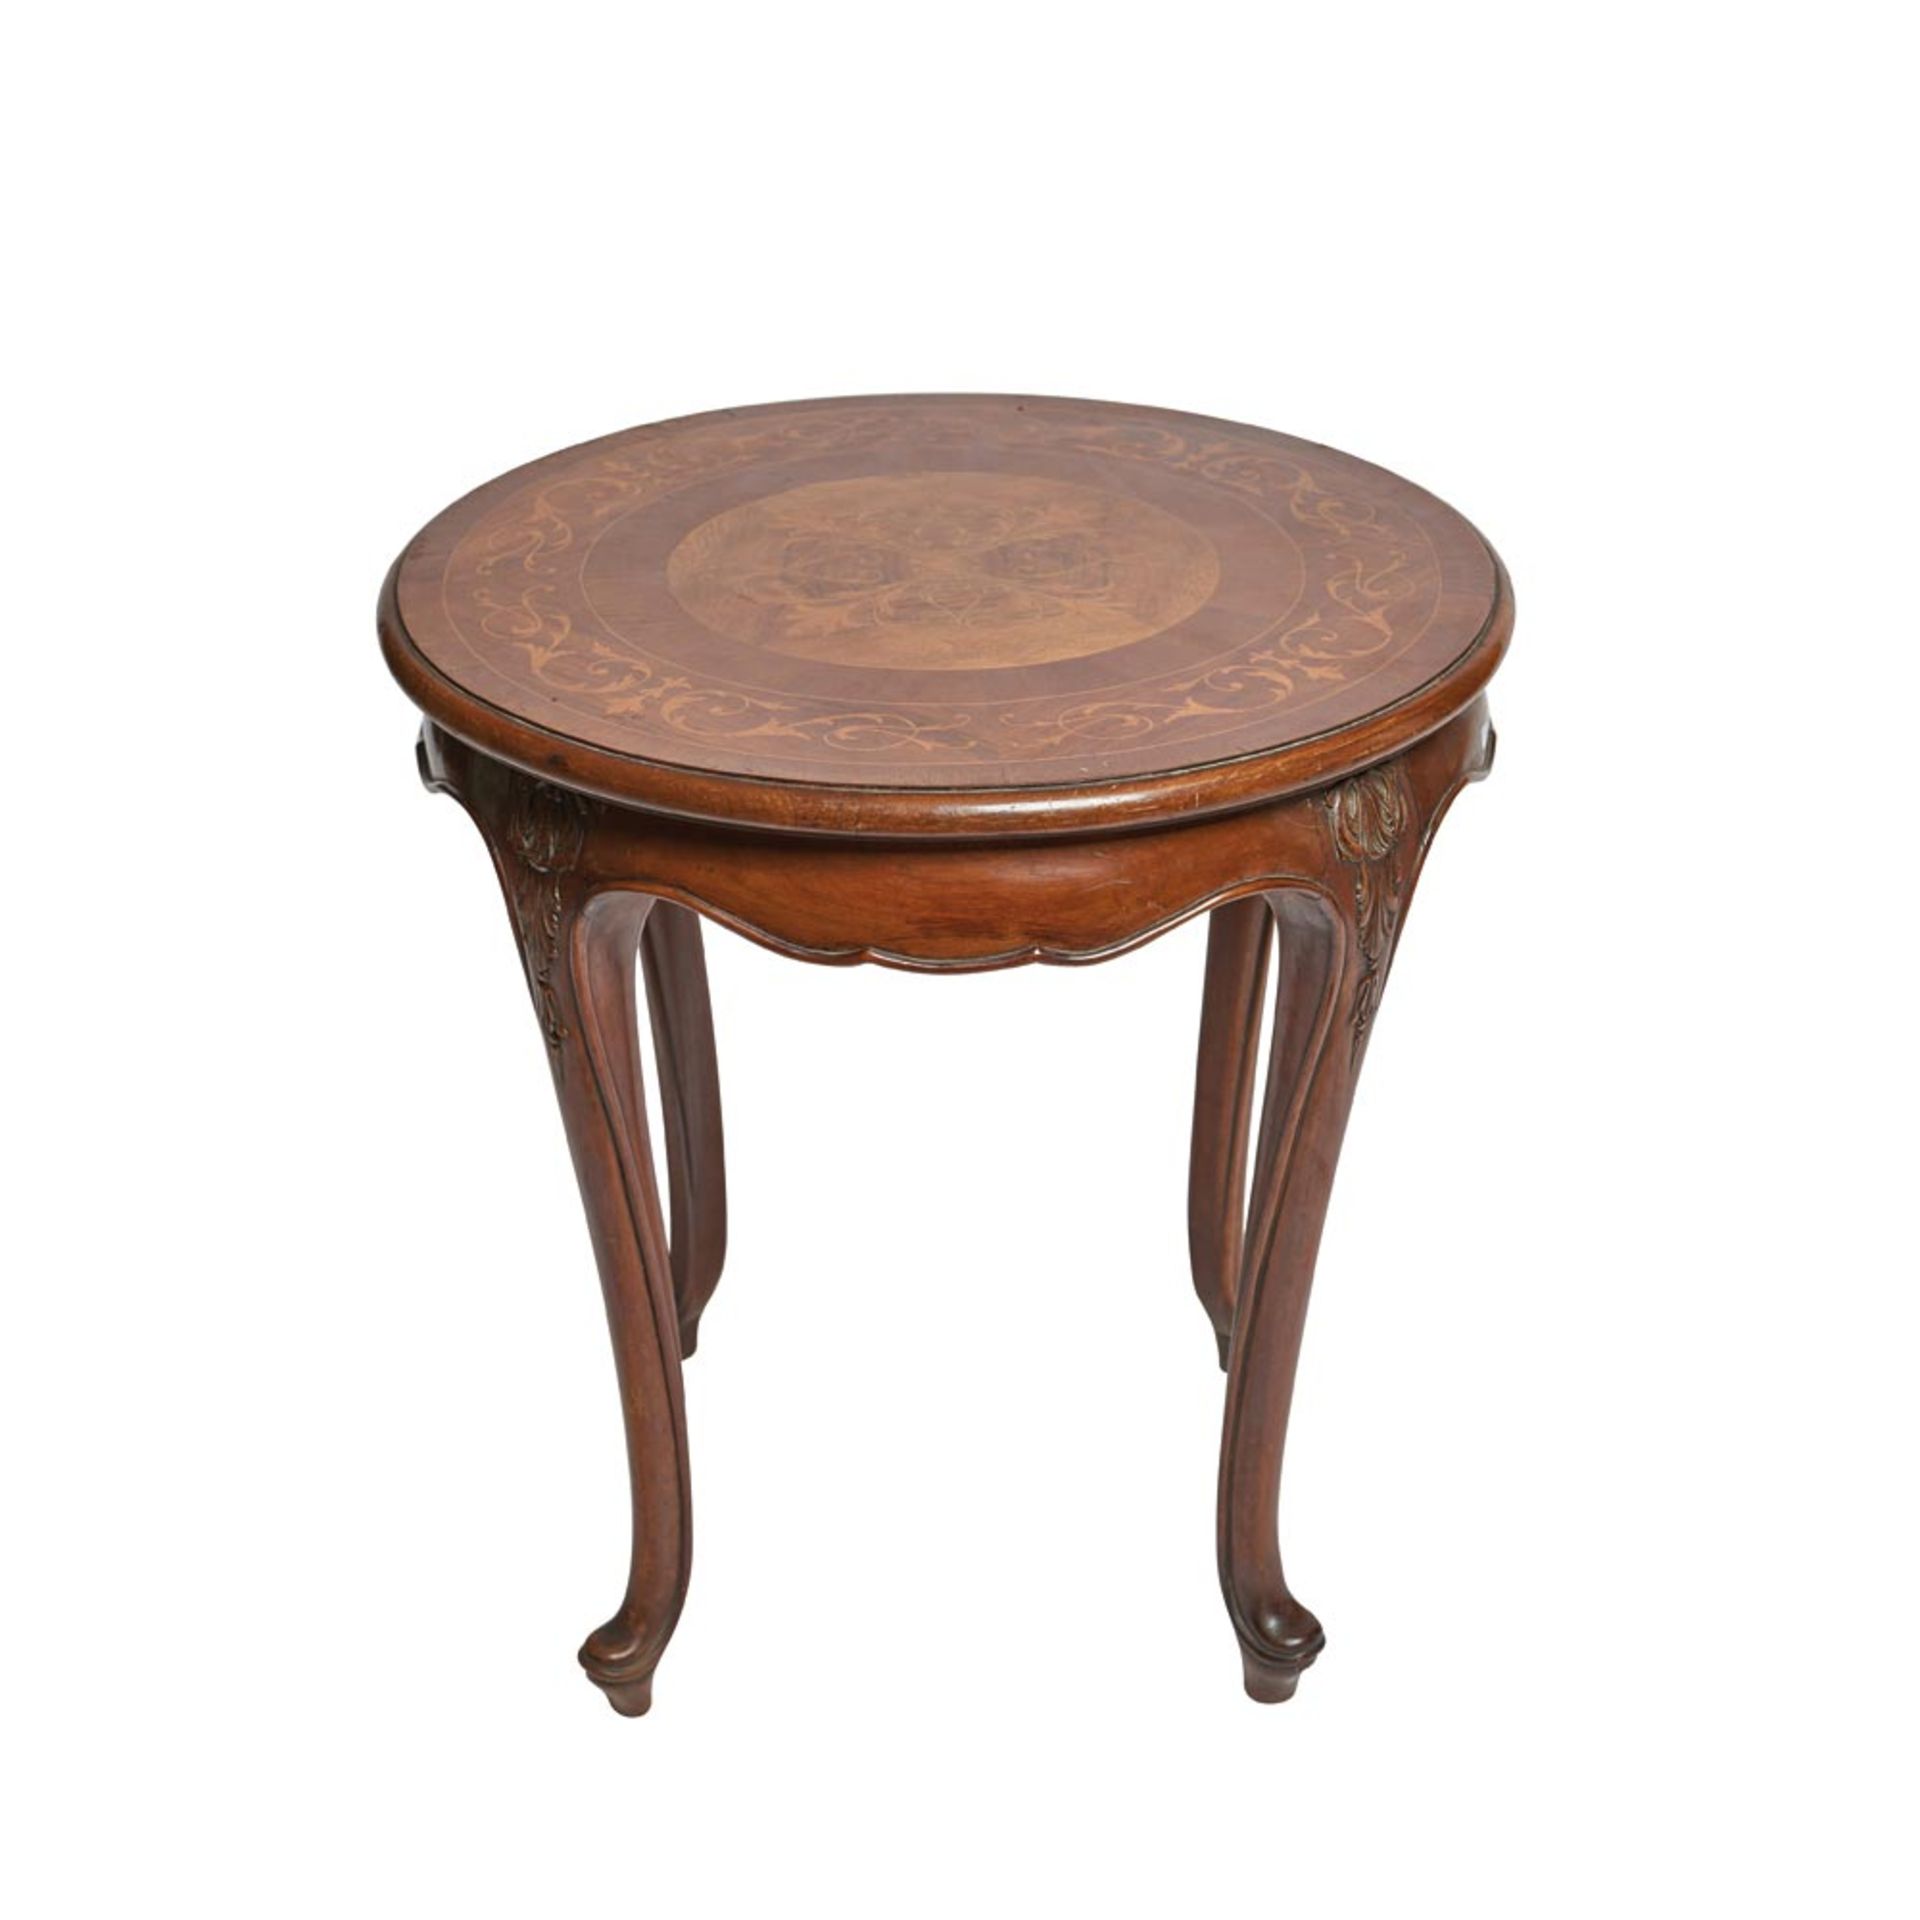 Cedar wood Isabelline style centre table